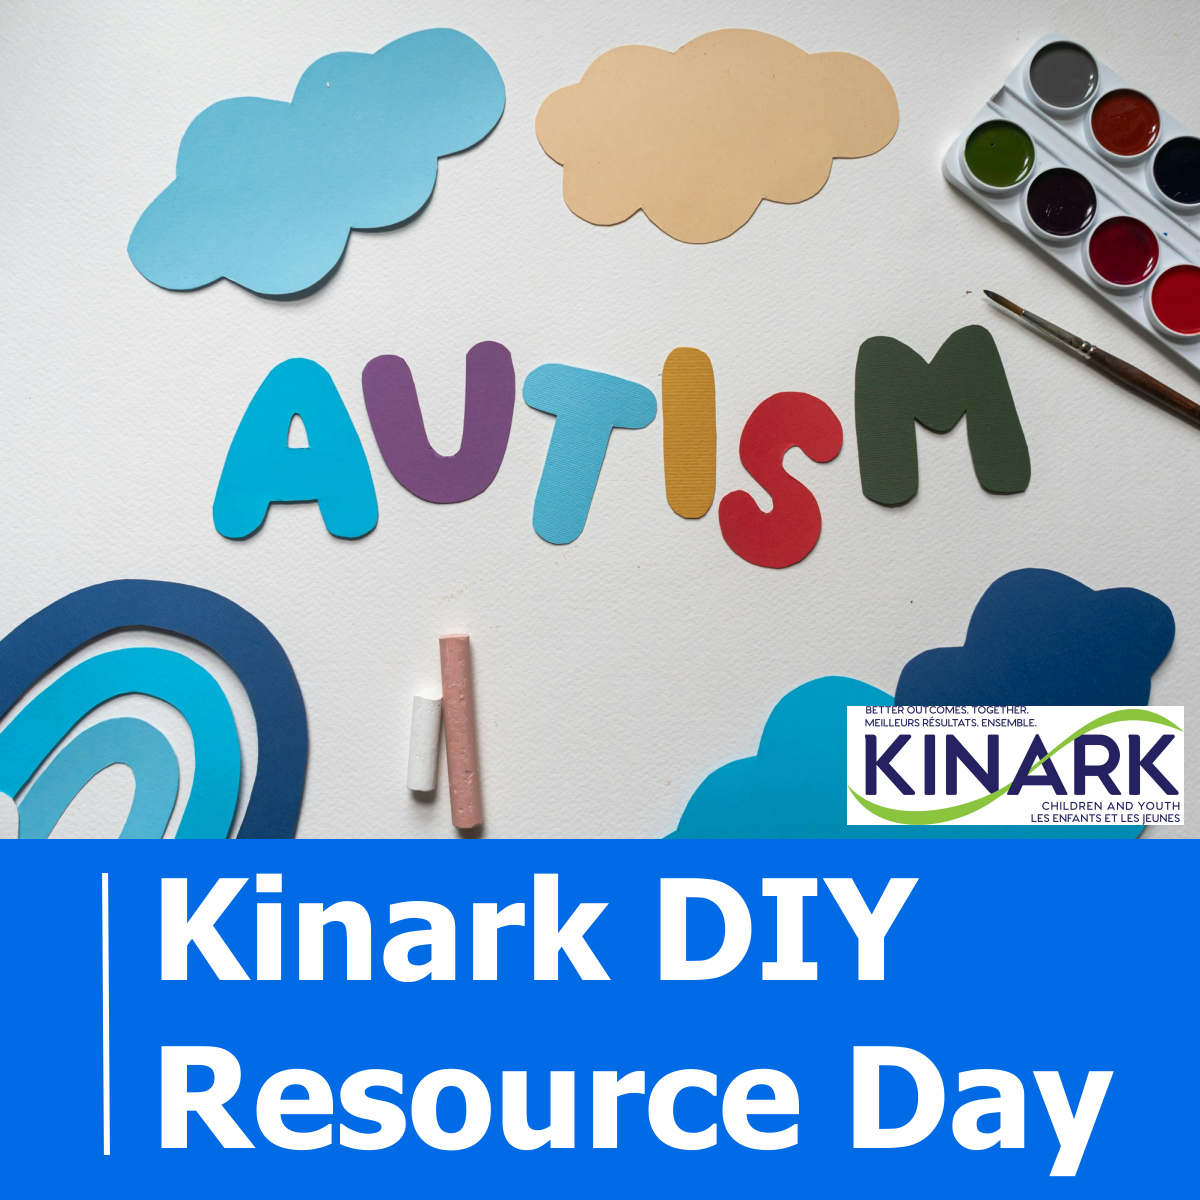 Photo of flatlay of cut paper shapers, including the word AUTISM and the logo for Kinark CHild & Family Services